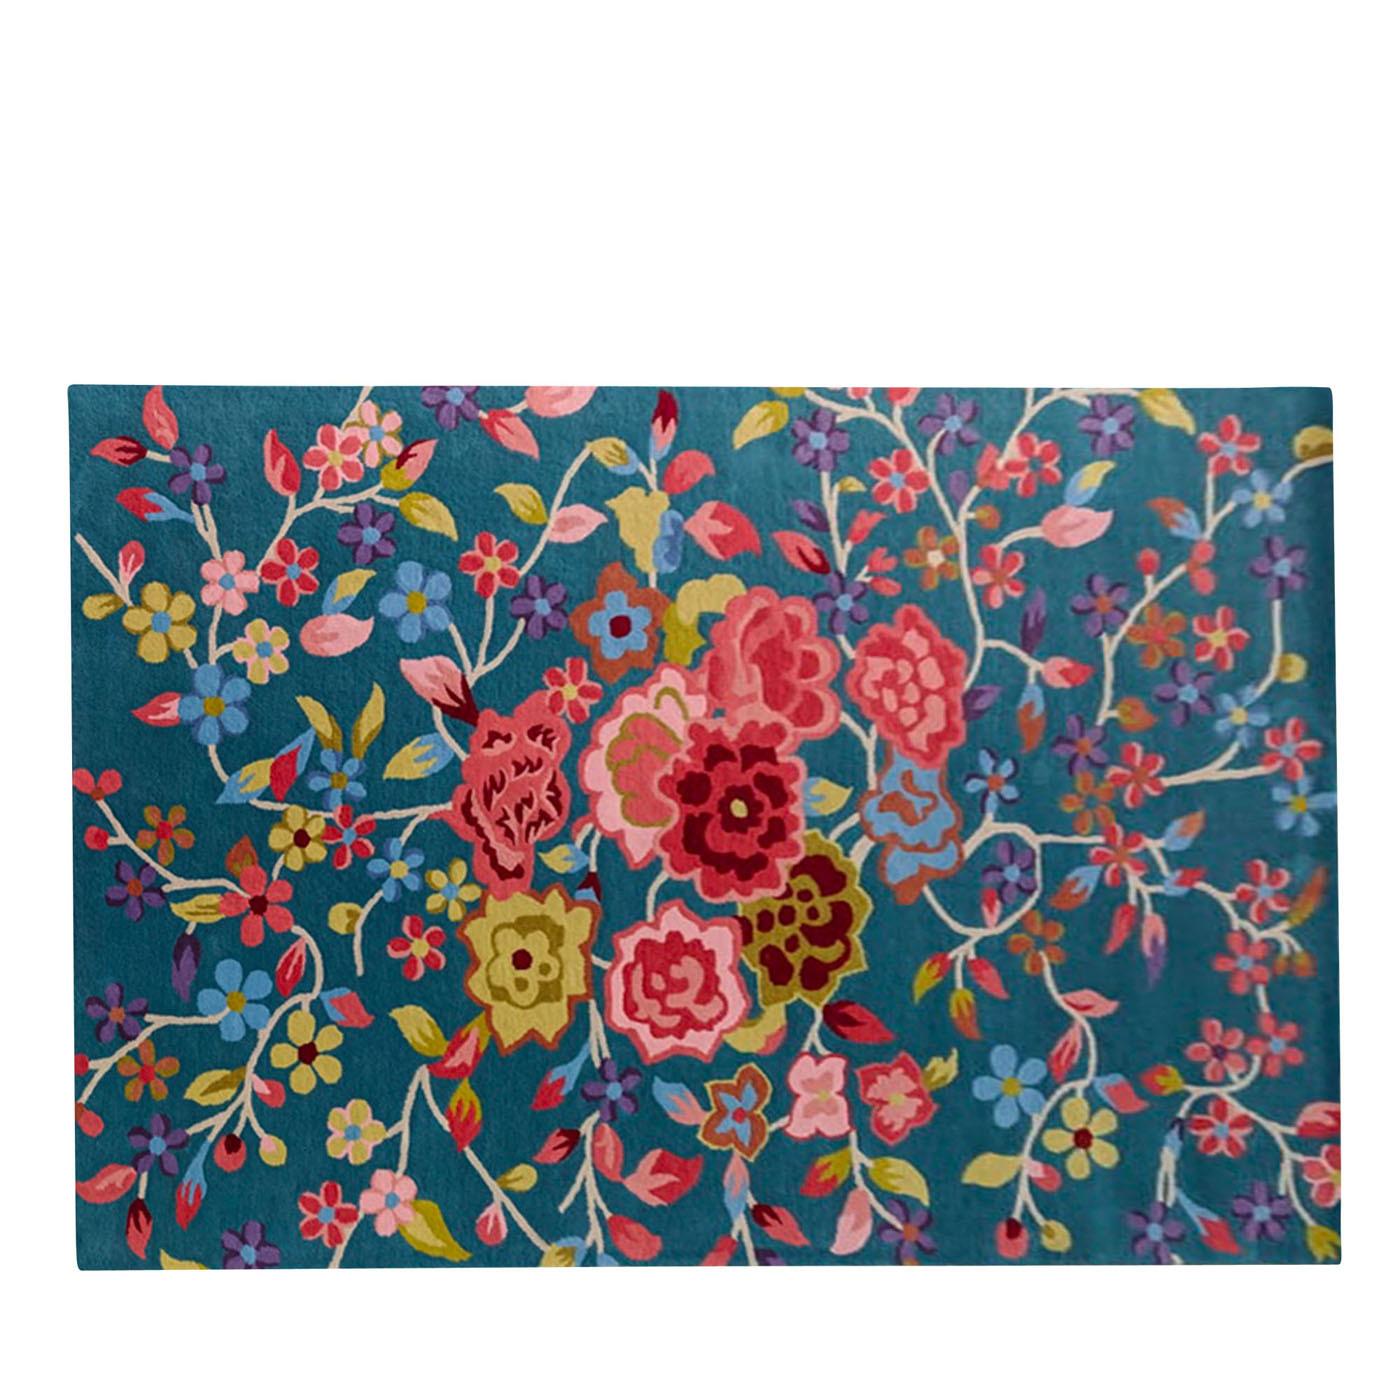 A harmonious palette of vibrant colors outlines this sumptuous, Persian-inspired carpet that pays homage to the Qadjar dynasty. Dominated by a vibrant color palette, this rug is defined by a dynamic arrangement of springtime flowers: a central